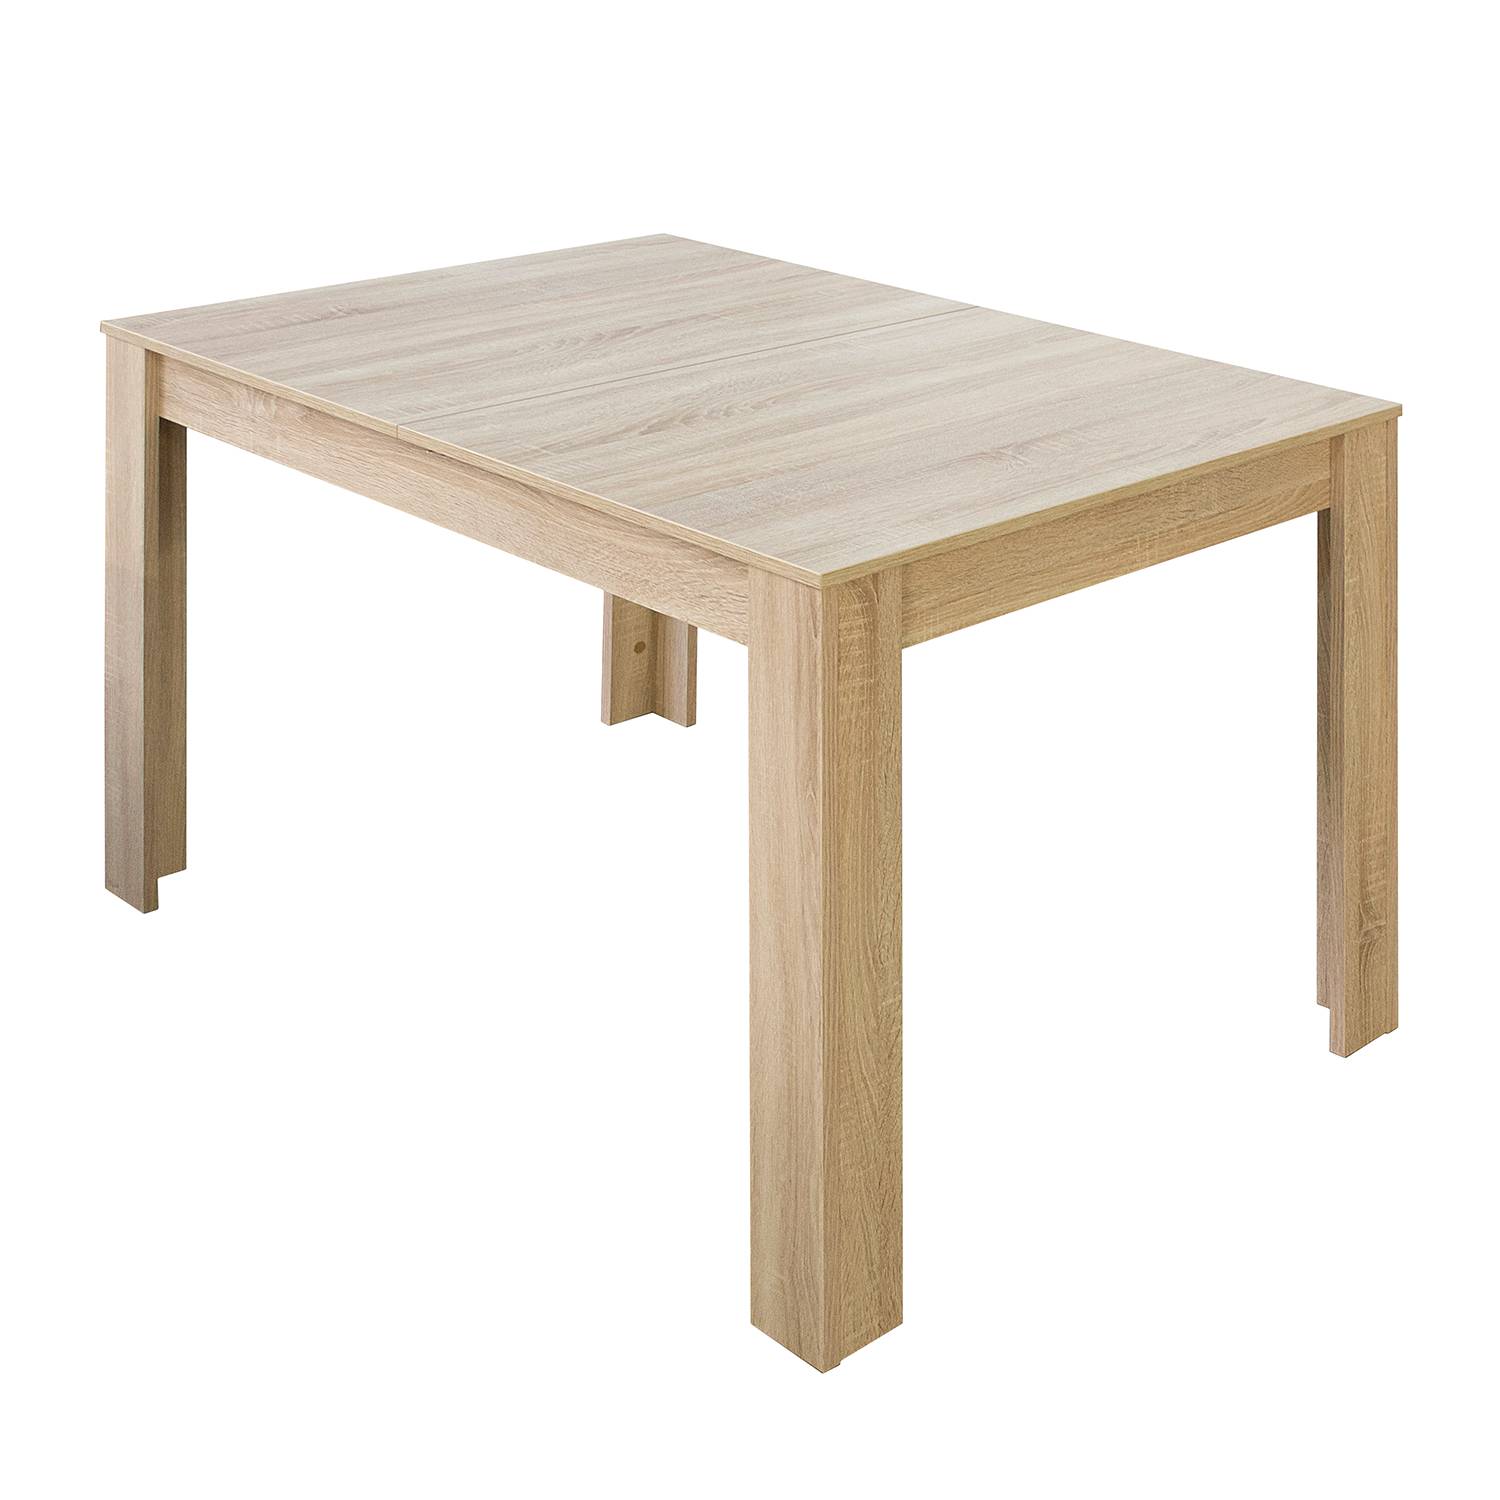 Image of Table extensible Fairford 000000001000121342